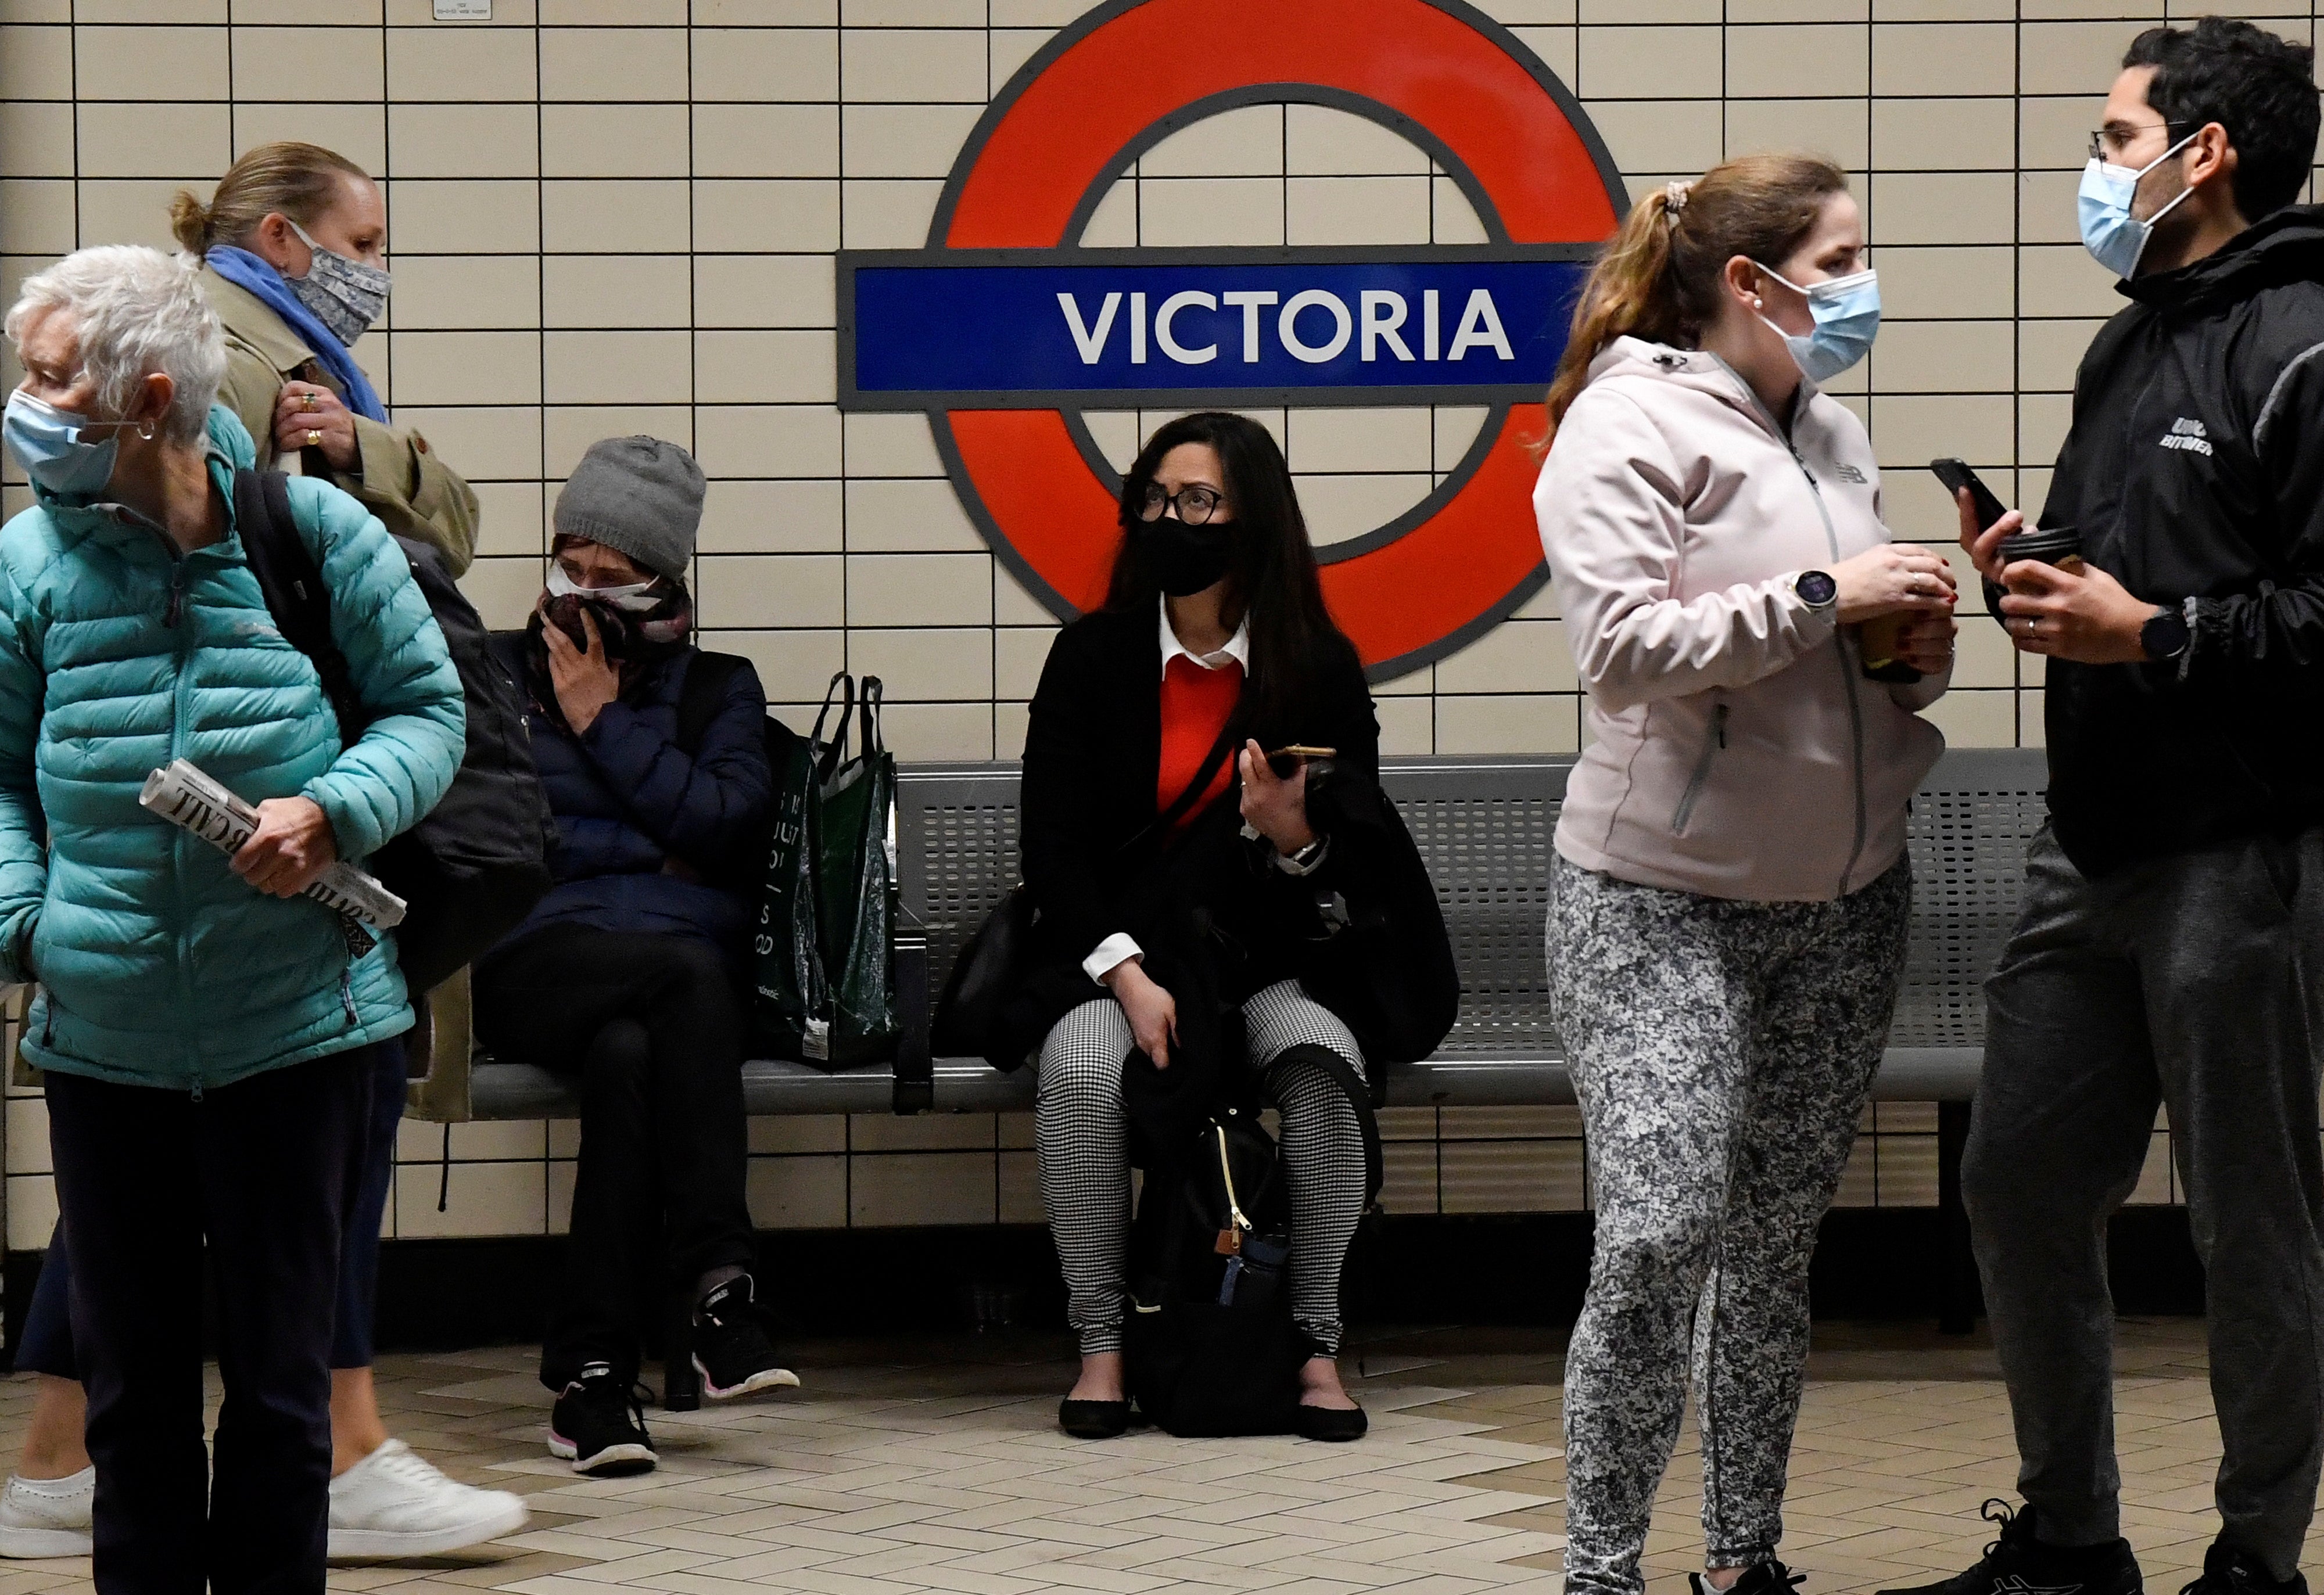 Transport for London continues to ask passengers to wear face coverings